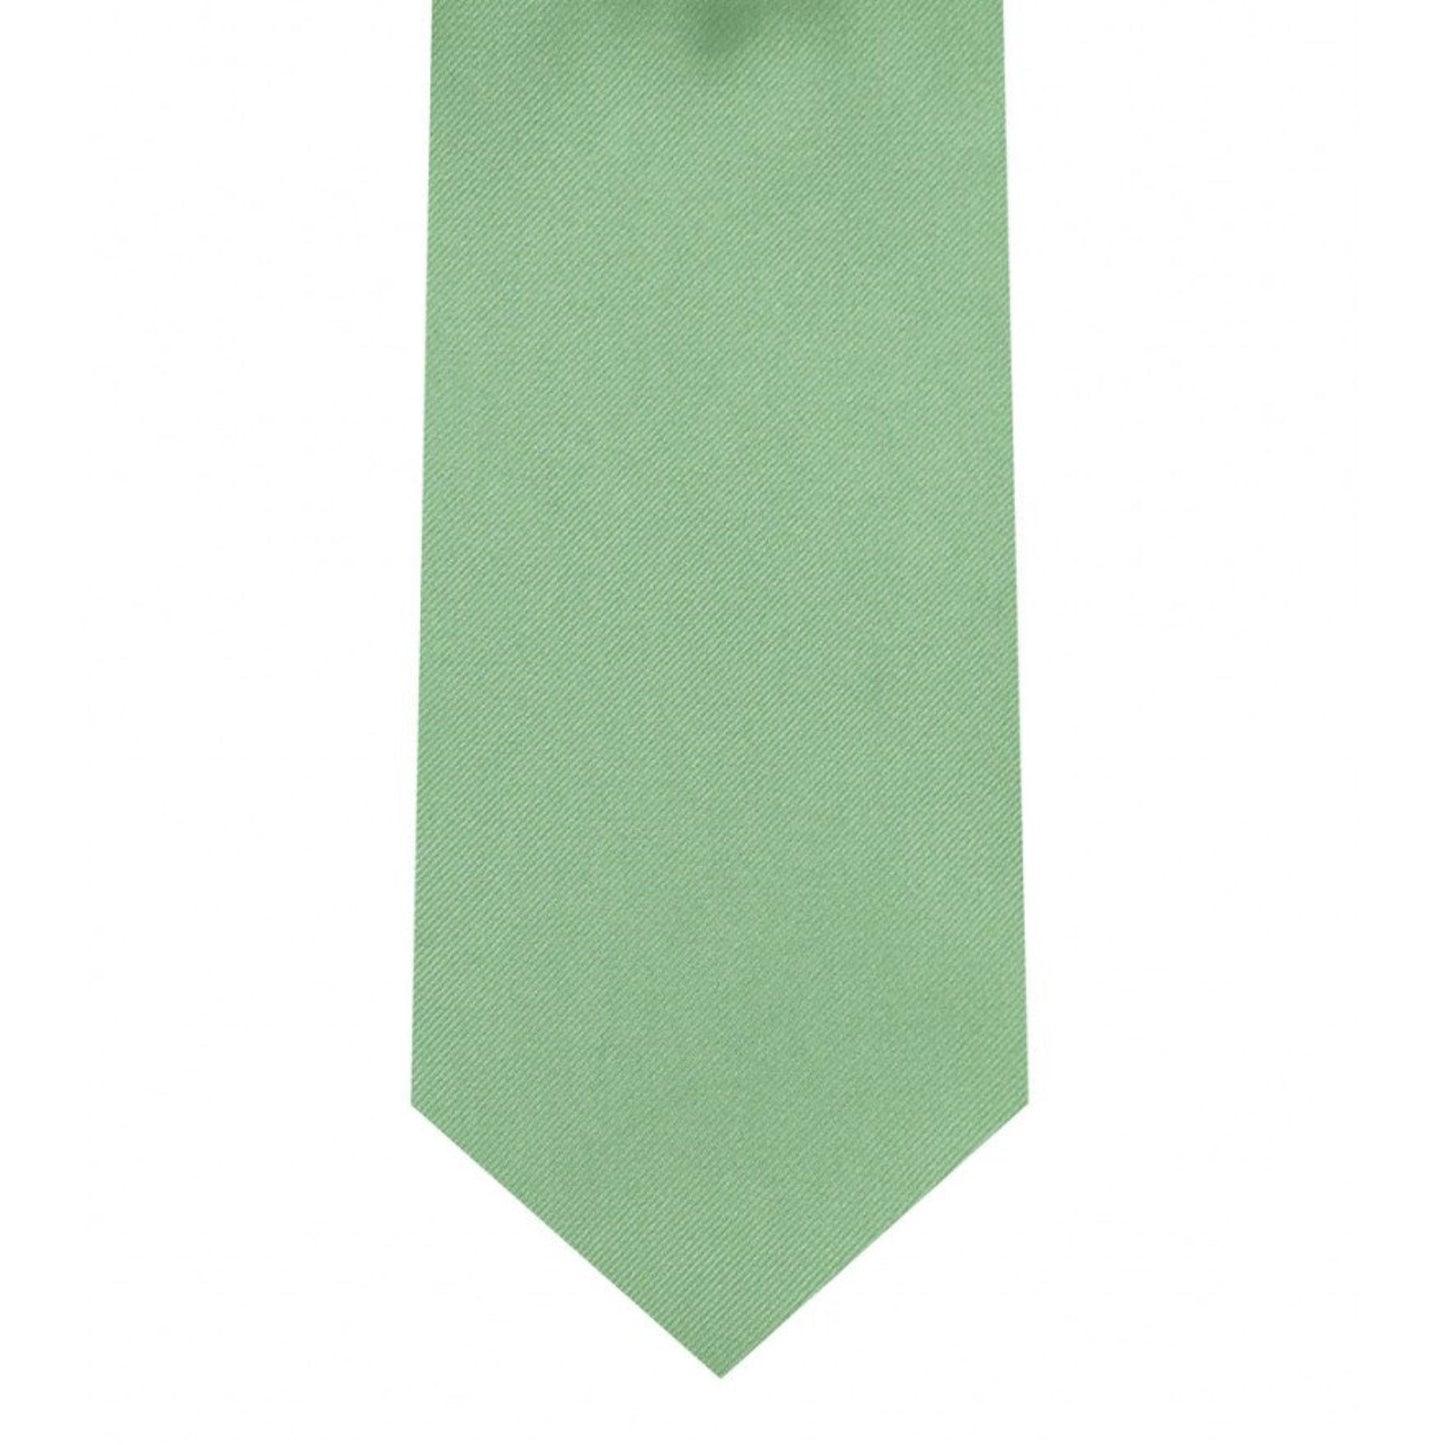 Classic Mint Tie Skinny width 2.75 inches With Matching Pocket Square | KCT Menswear